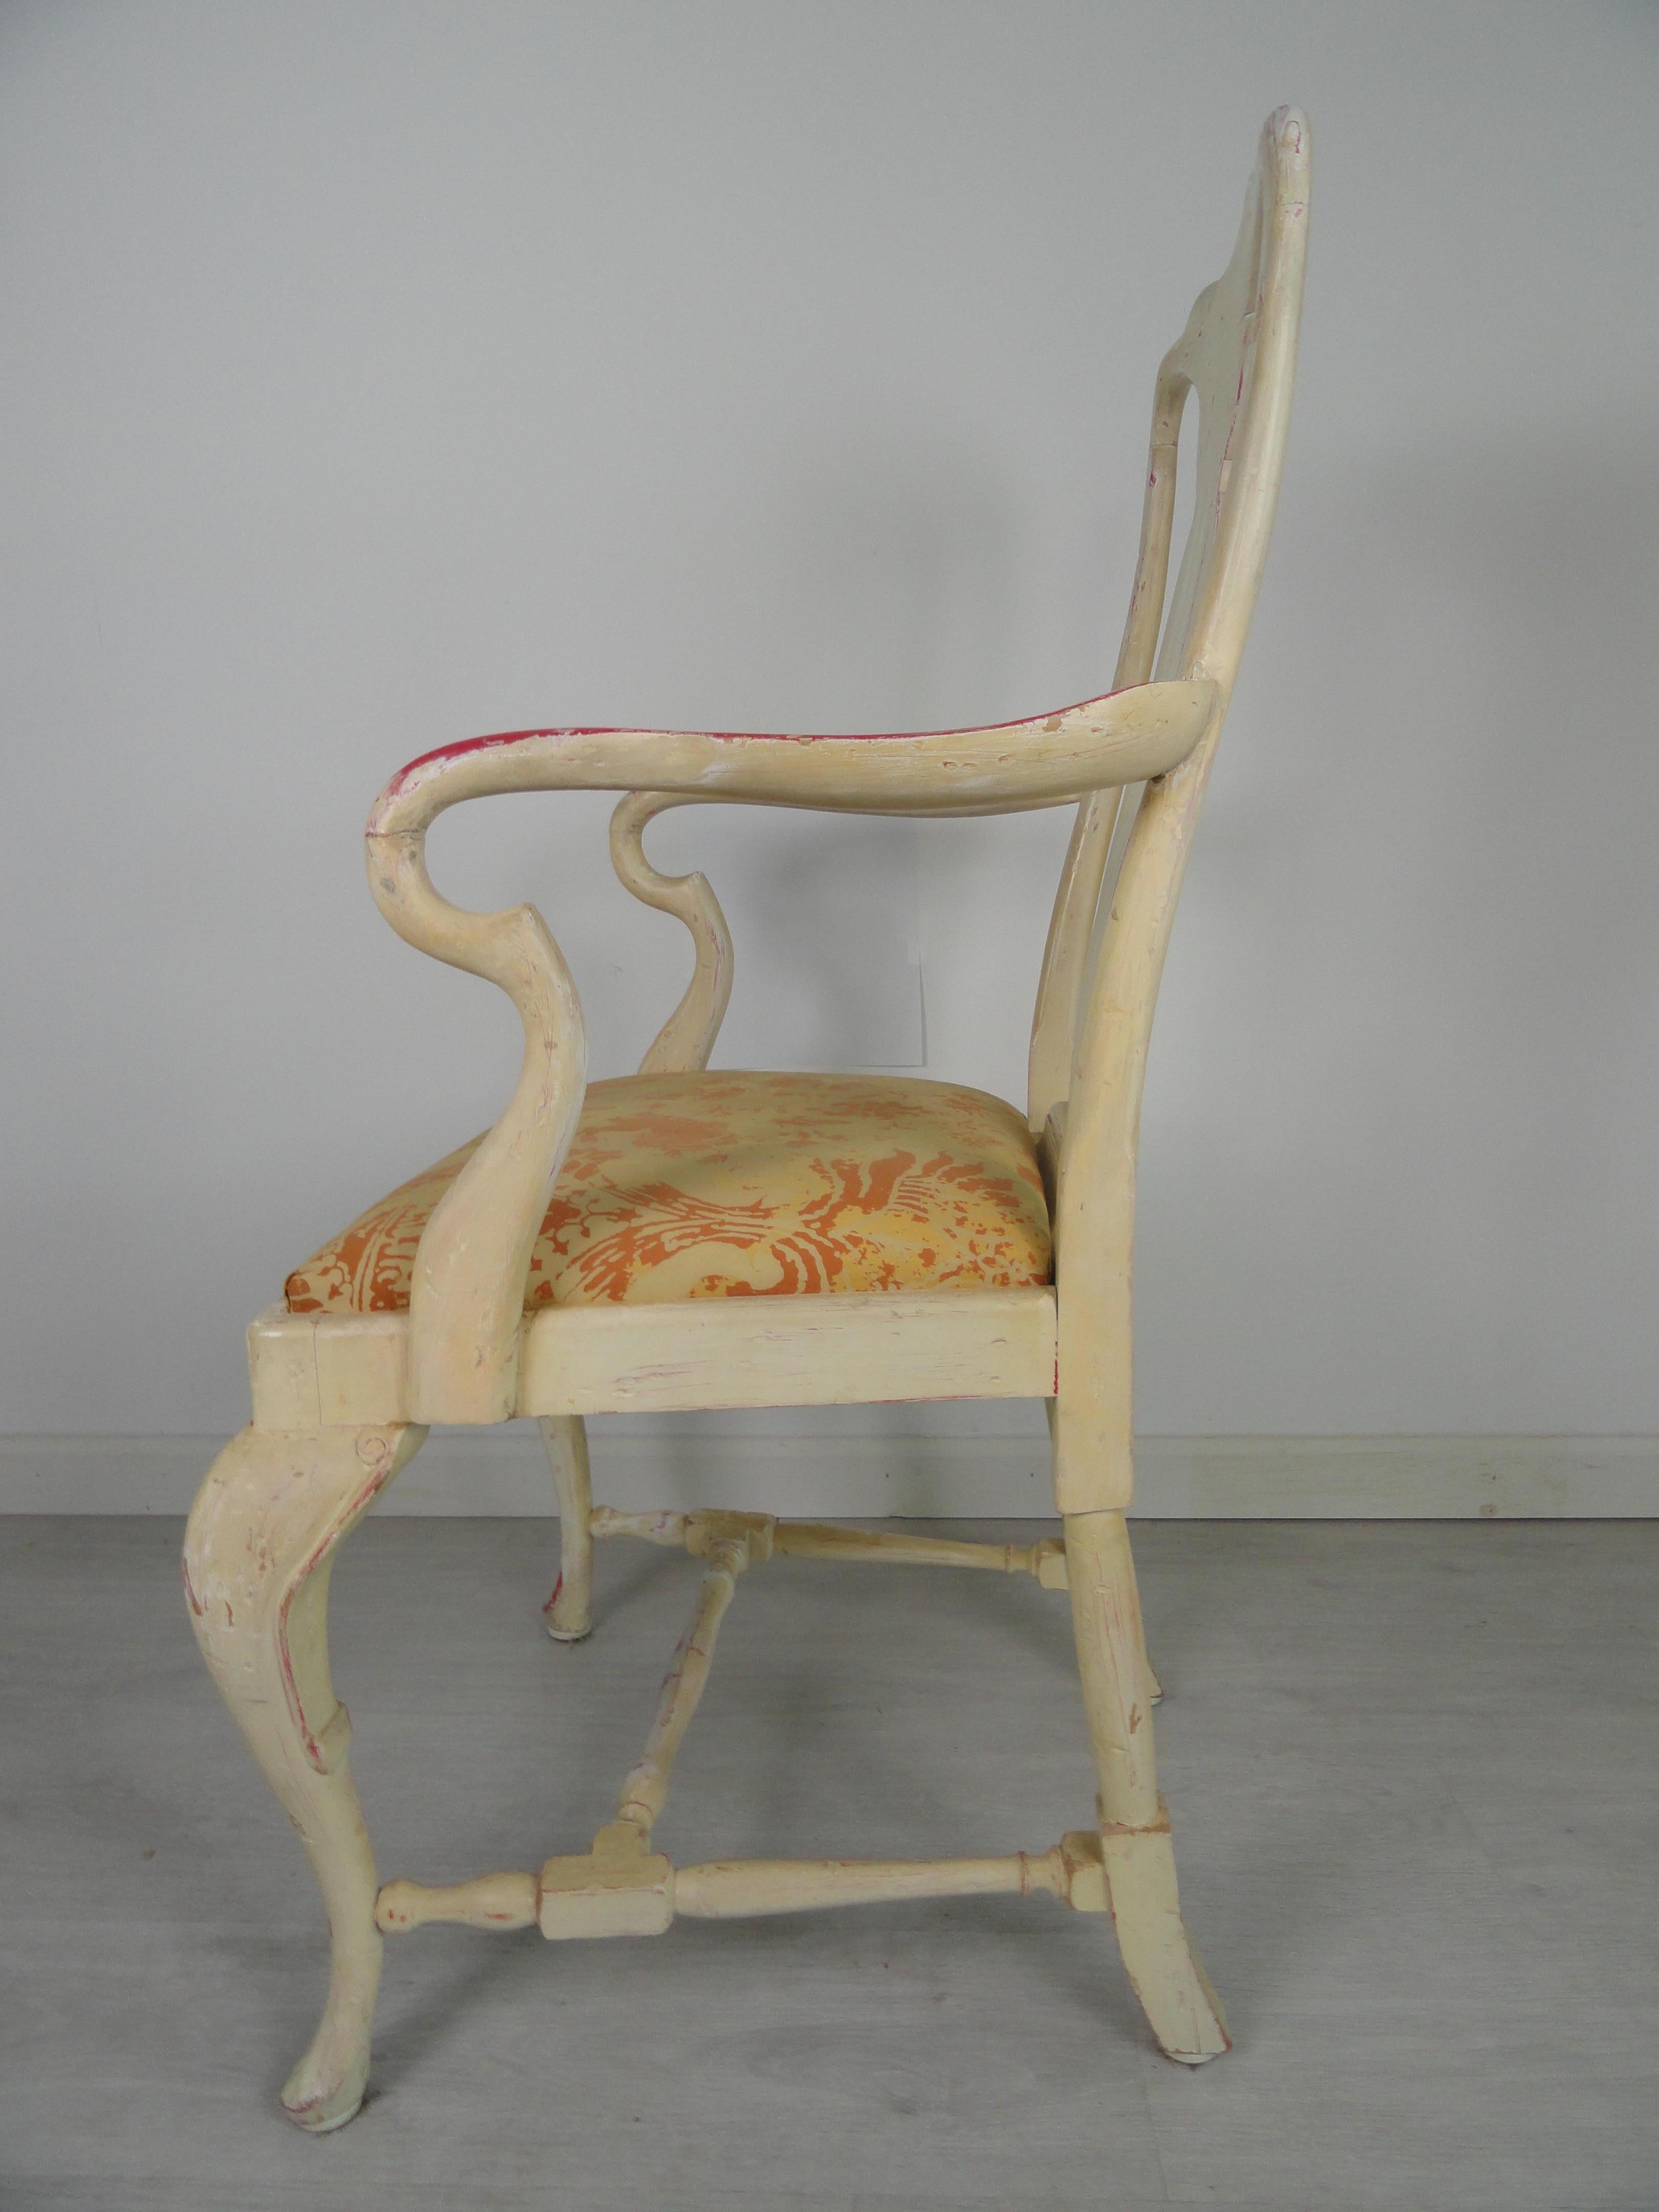 Wood mahogany painted Dutch chair with cabriole legs connected by a carved bridge. The seat is upholstered in cotton Italian fabric. Beautiful patina, especially on the arms.